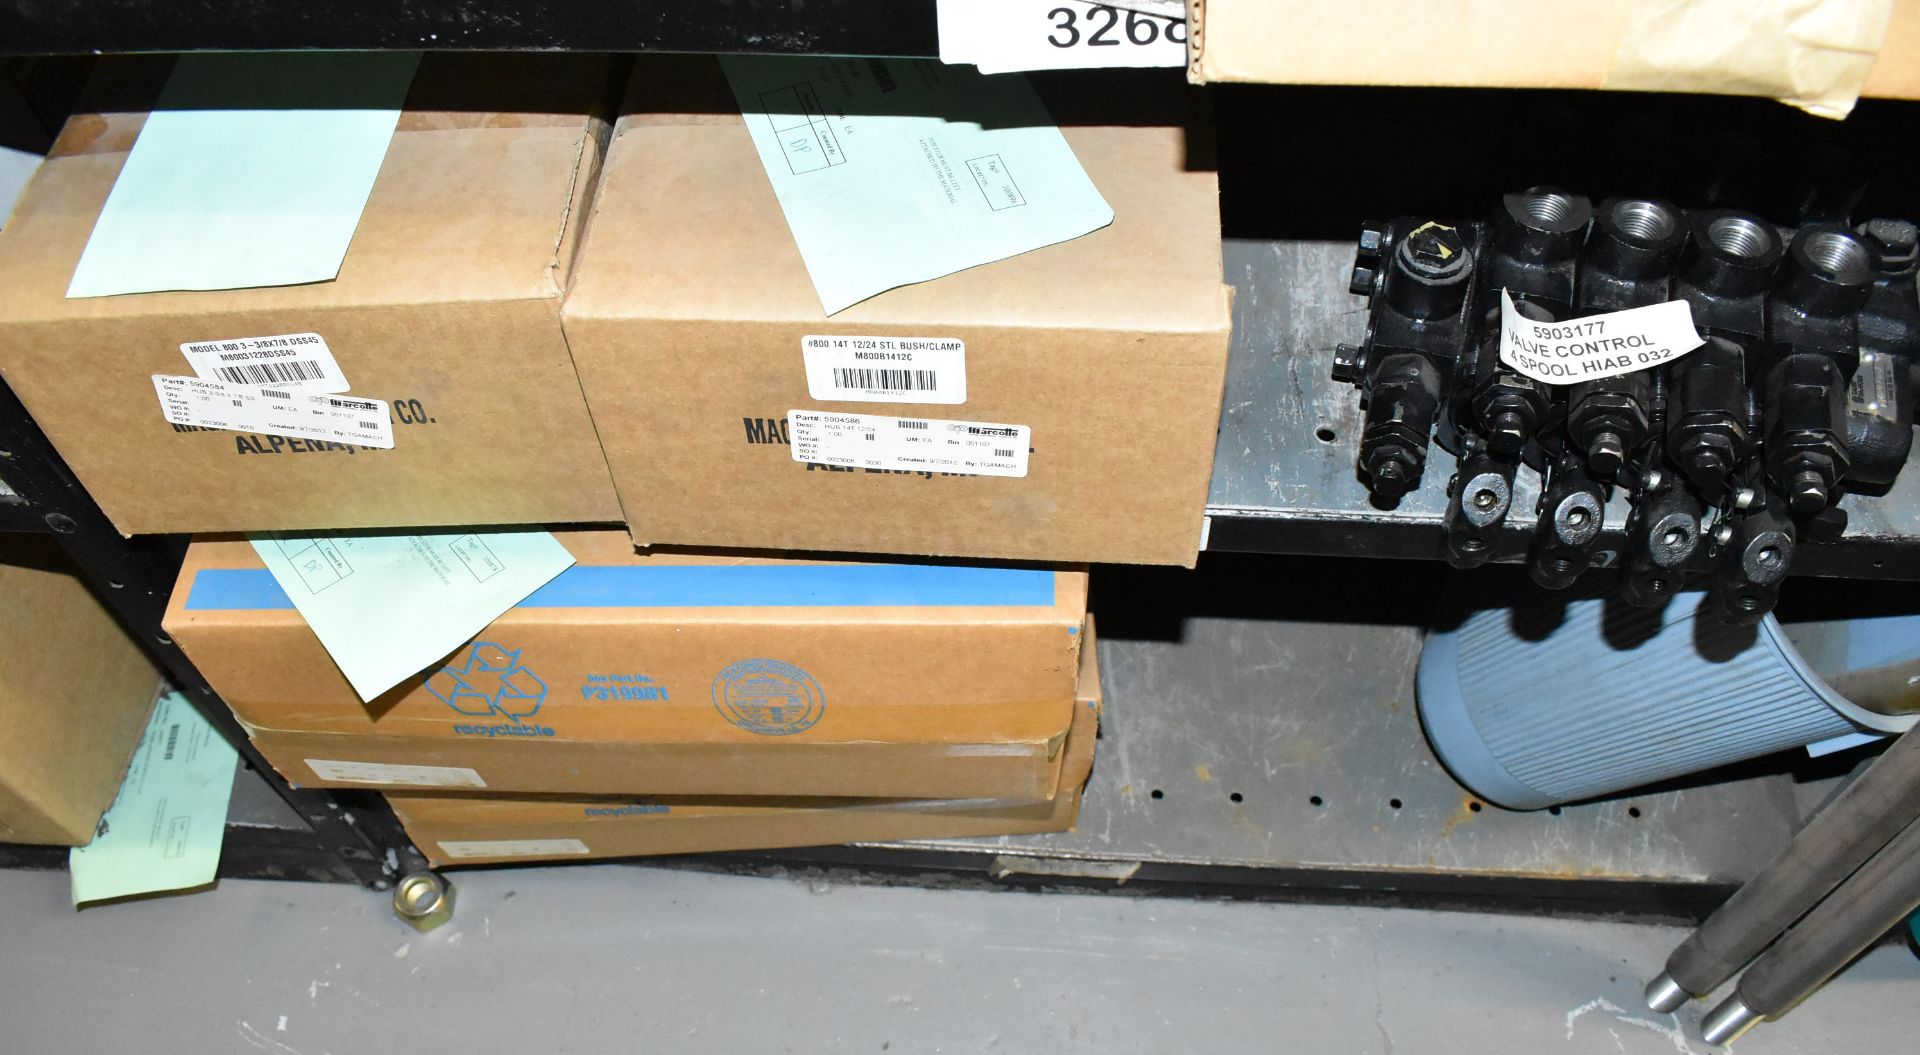 LOT/ CONTENTS OF SHELVES - INCLUDING OIL FILTERS, BEARINGS, HYDRAULIC HIGH PRESSURE FILTERS, - Image 5 of 5